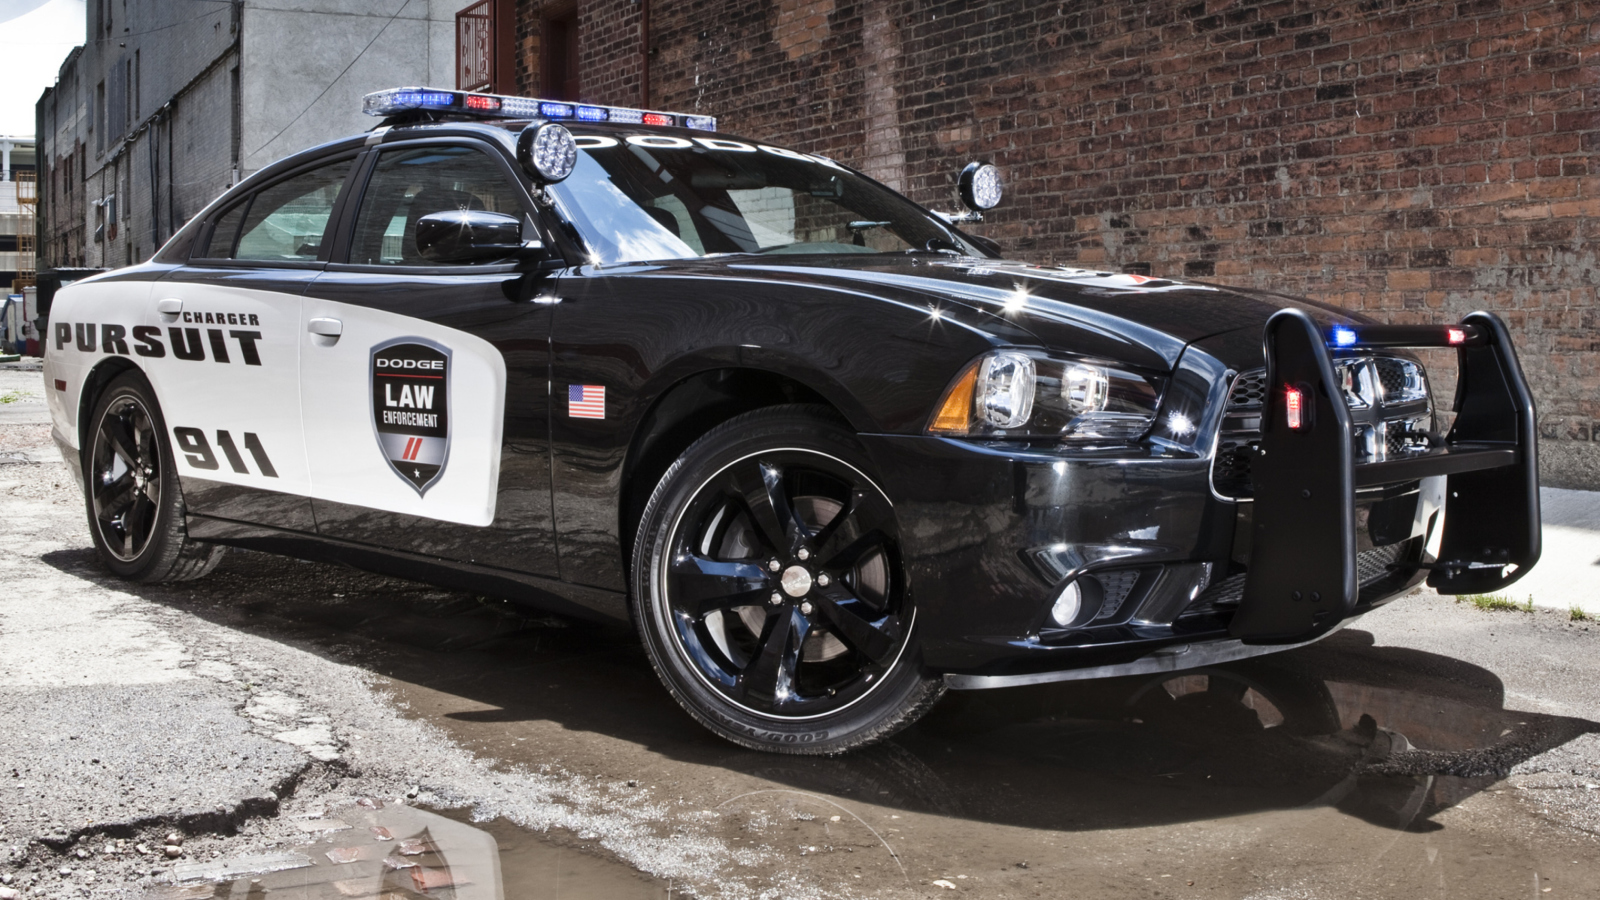 Dodge Charger - Police Car wallpaper 1600x900